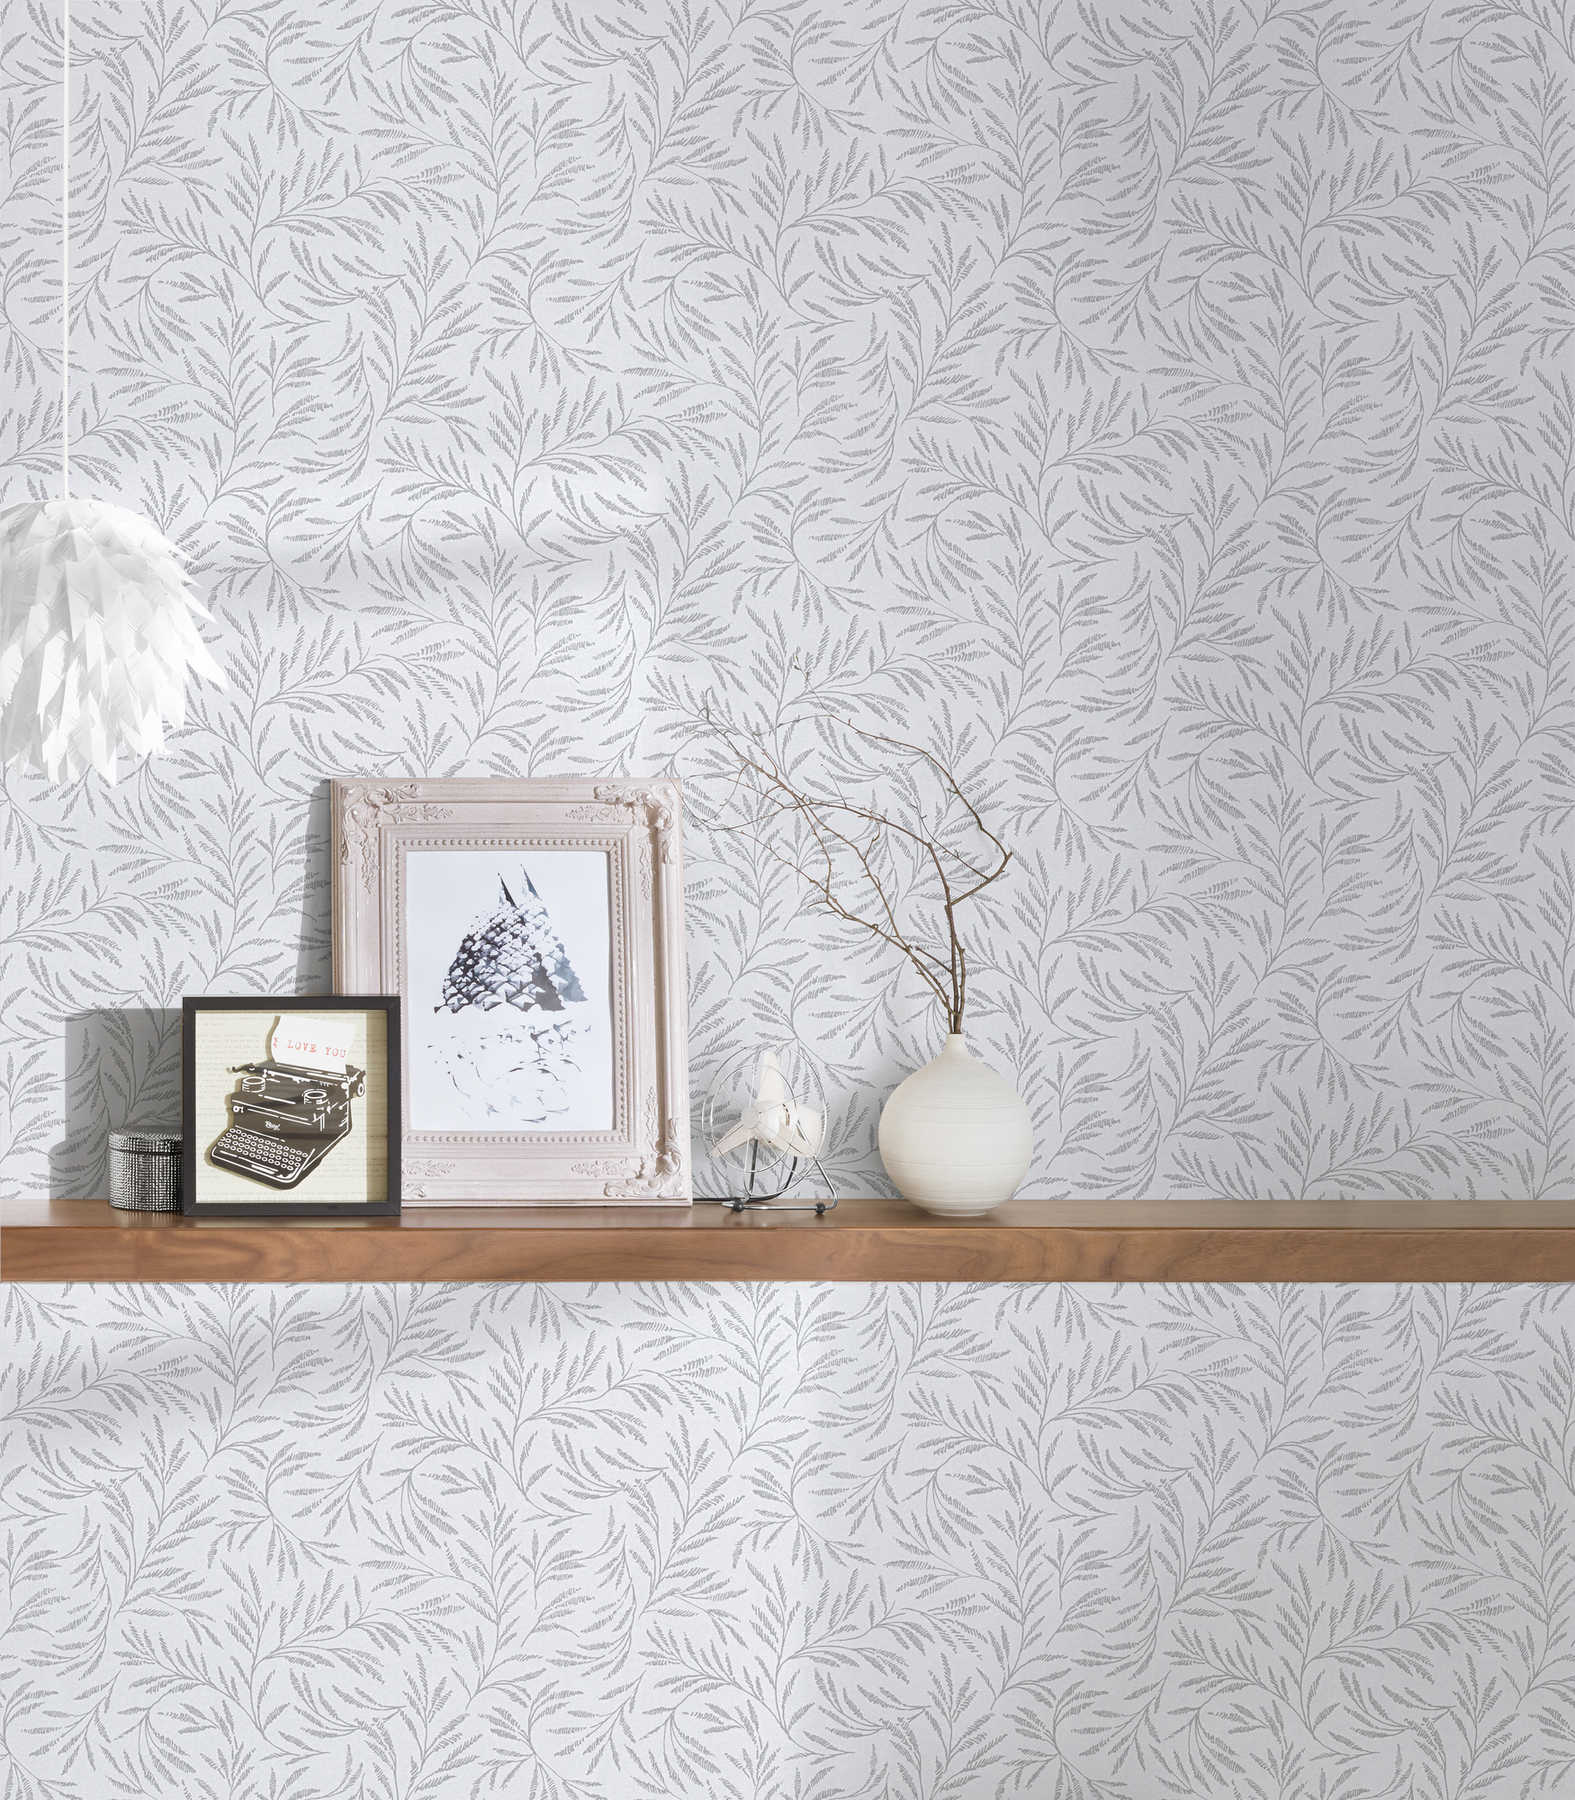             Non-woven wallpaper metallic pattern with leaf tendrils - grey, silver
        